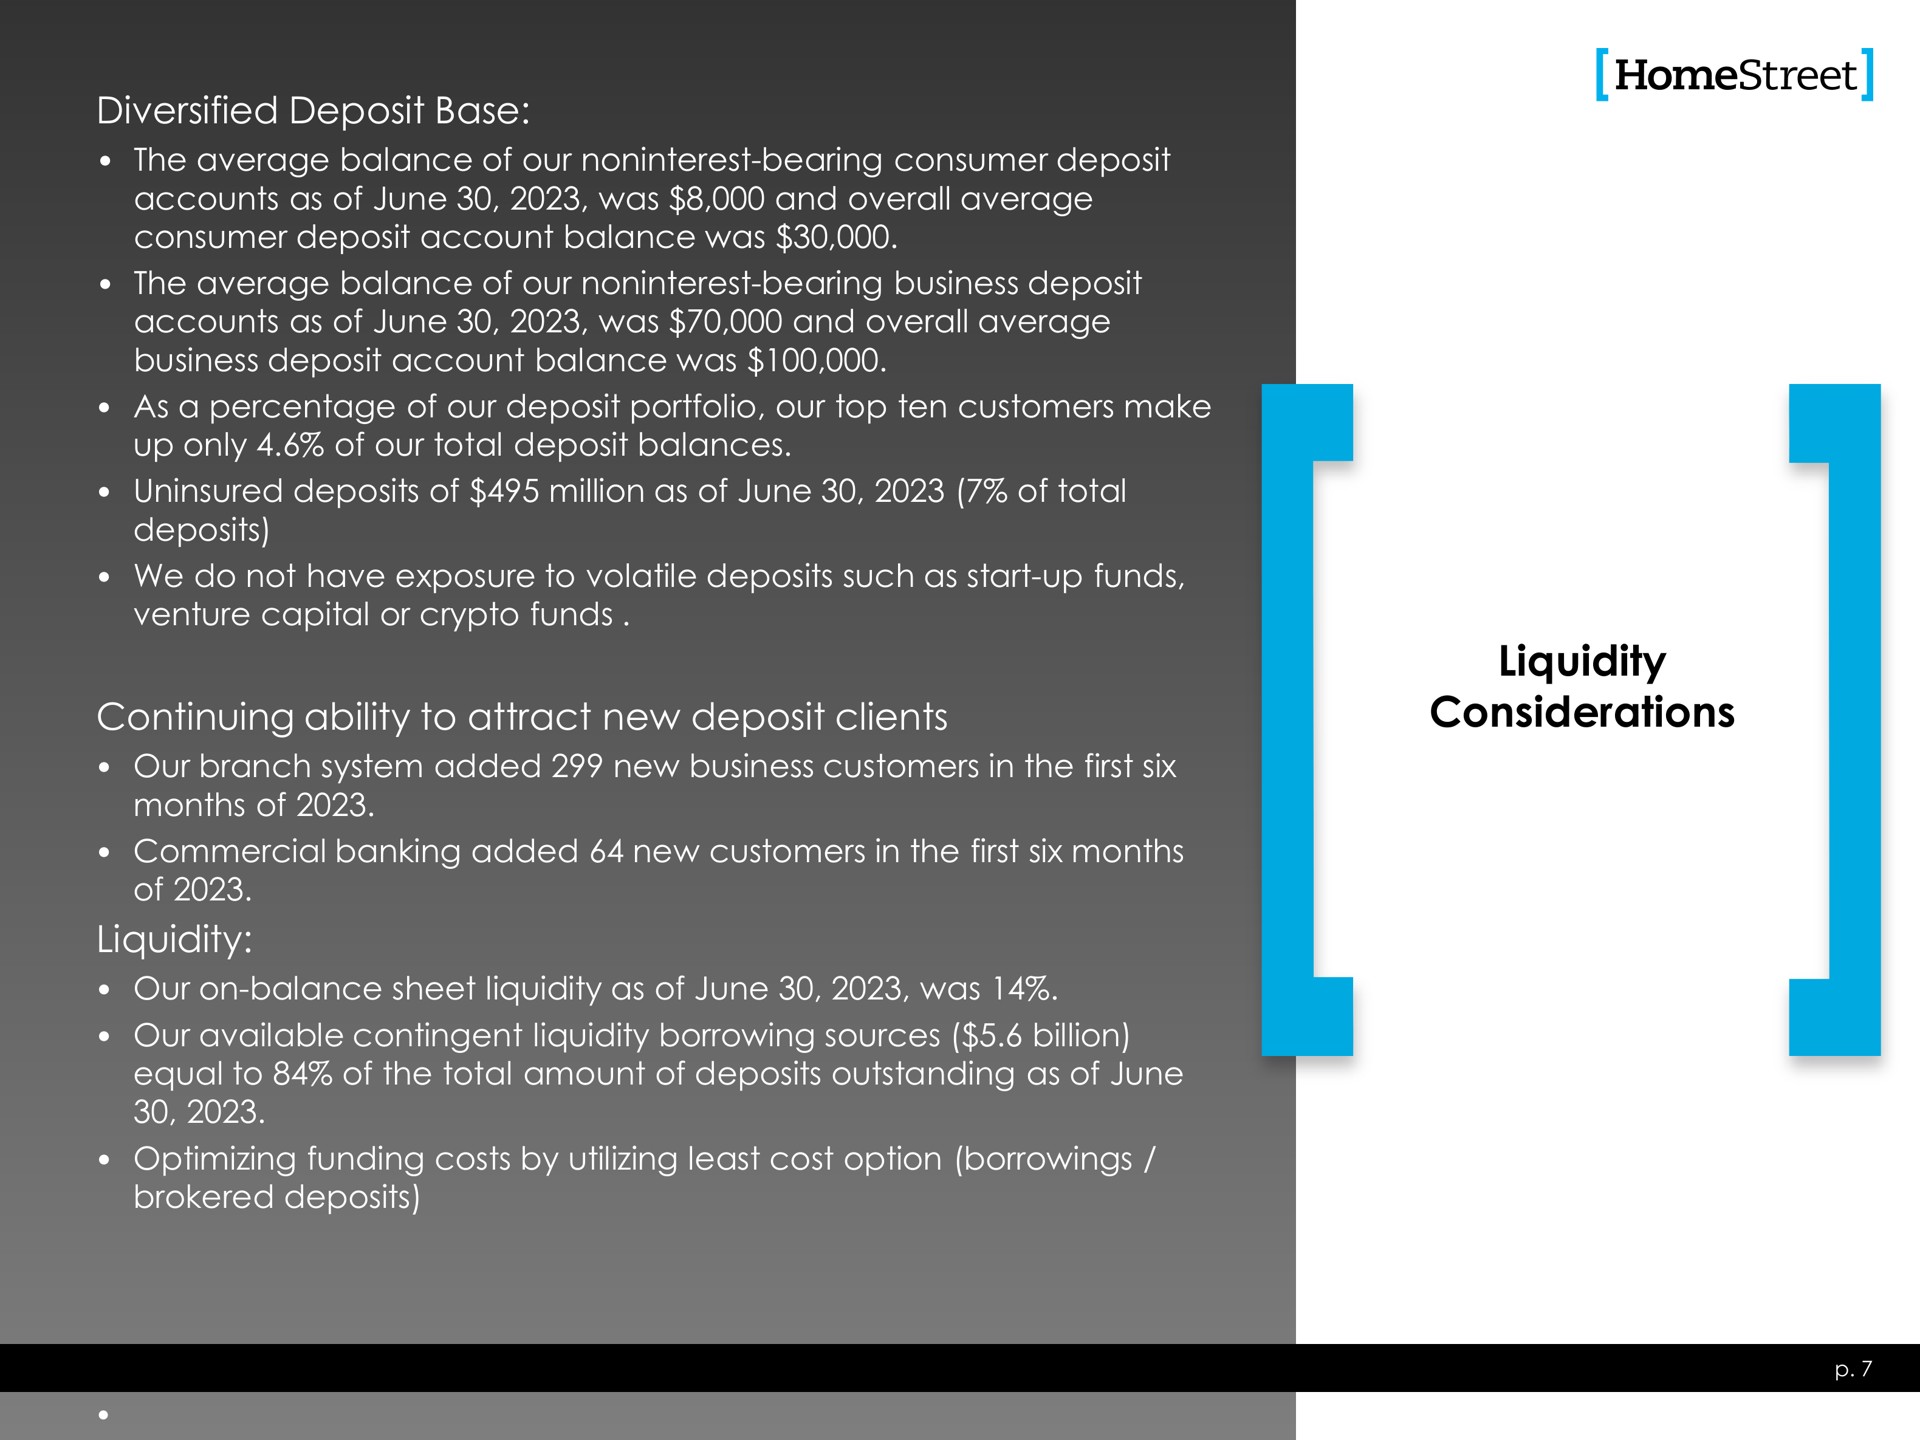 liquidity considerations continuing ability to attract new deposit clients | HomeStreet